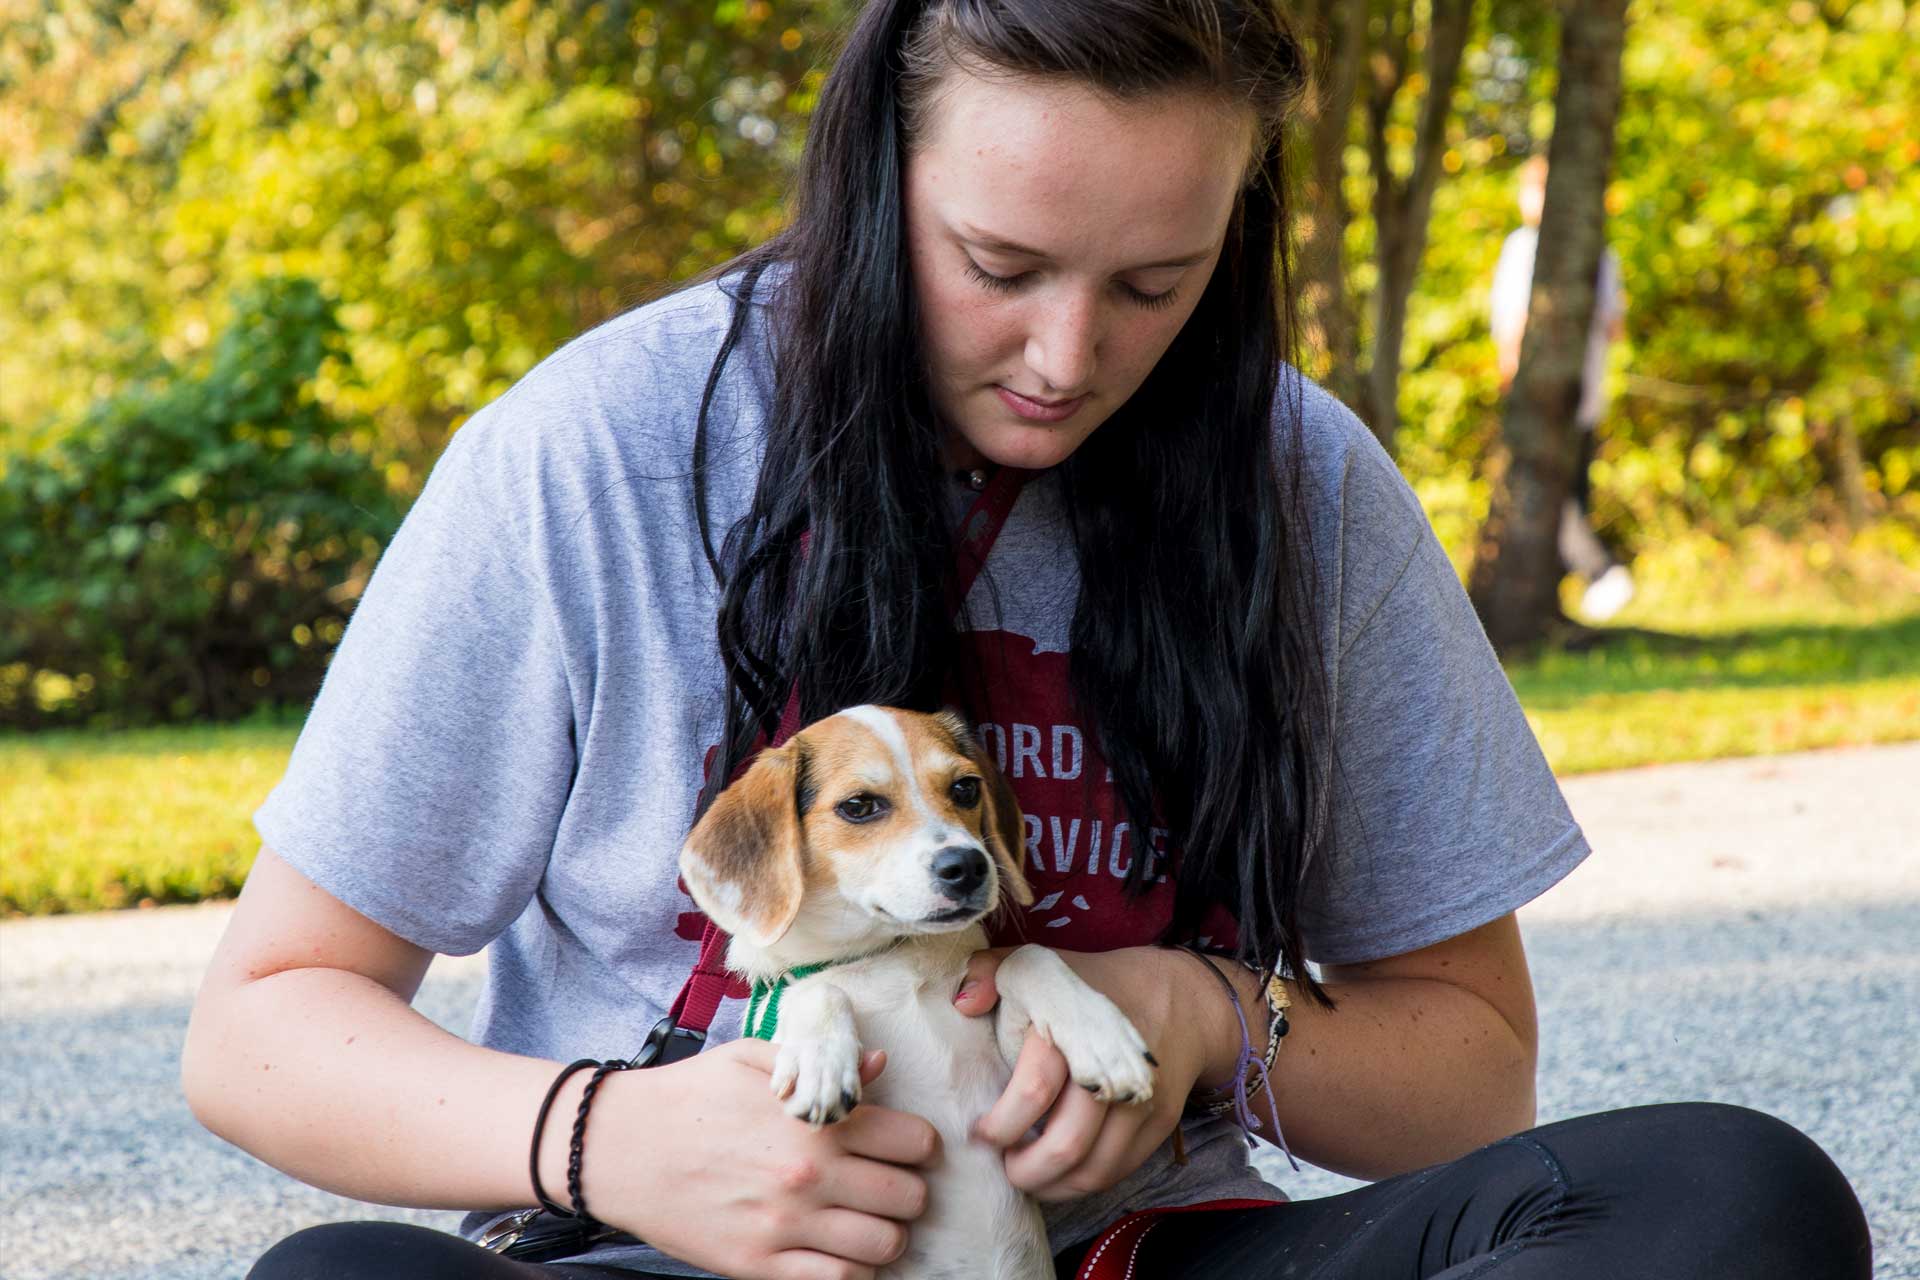 Students help care for rescue dogs on Day of Service.